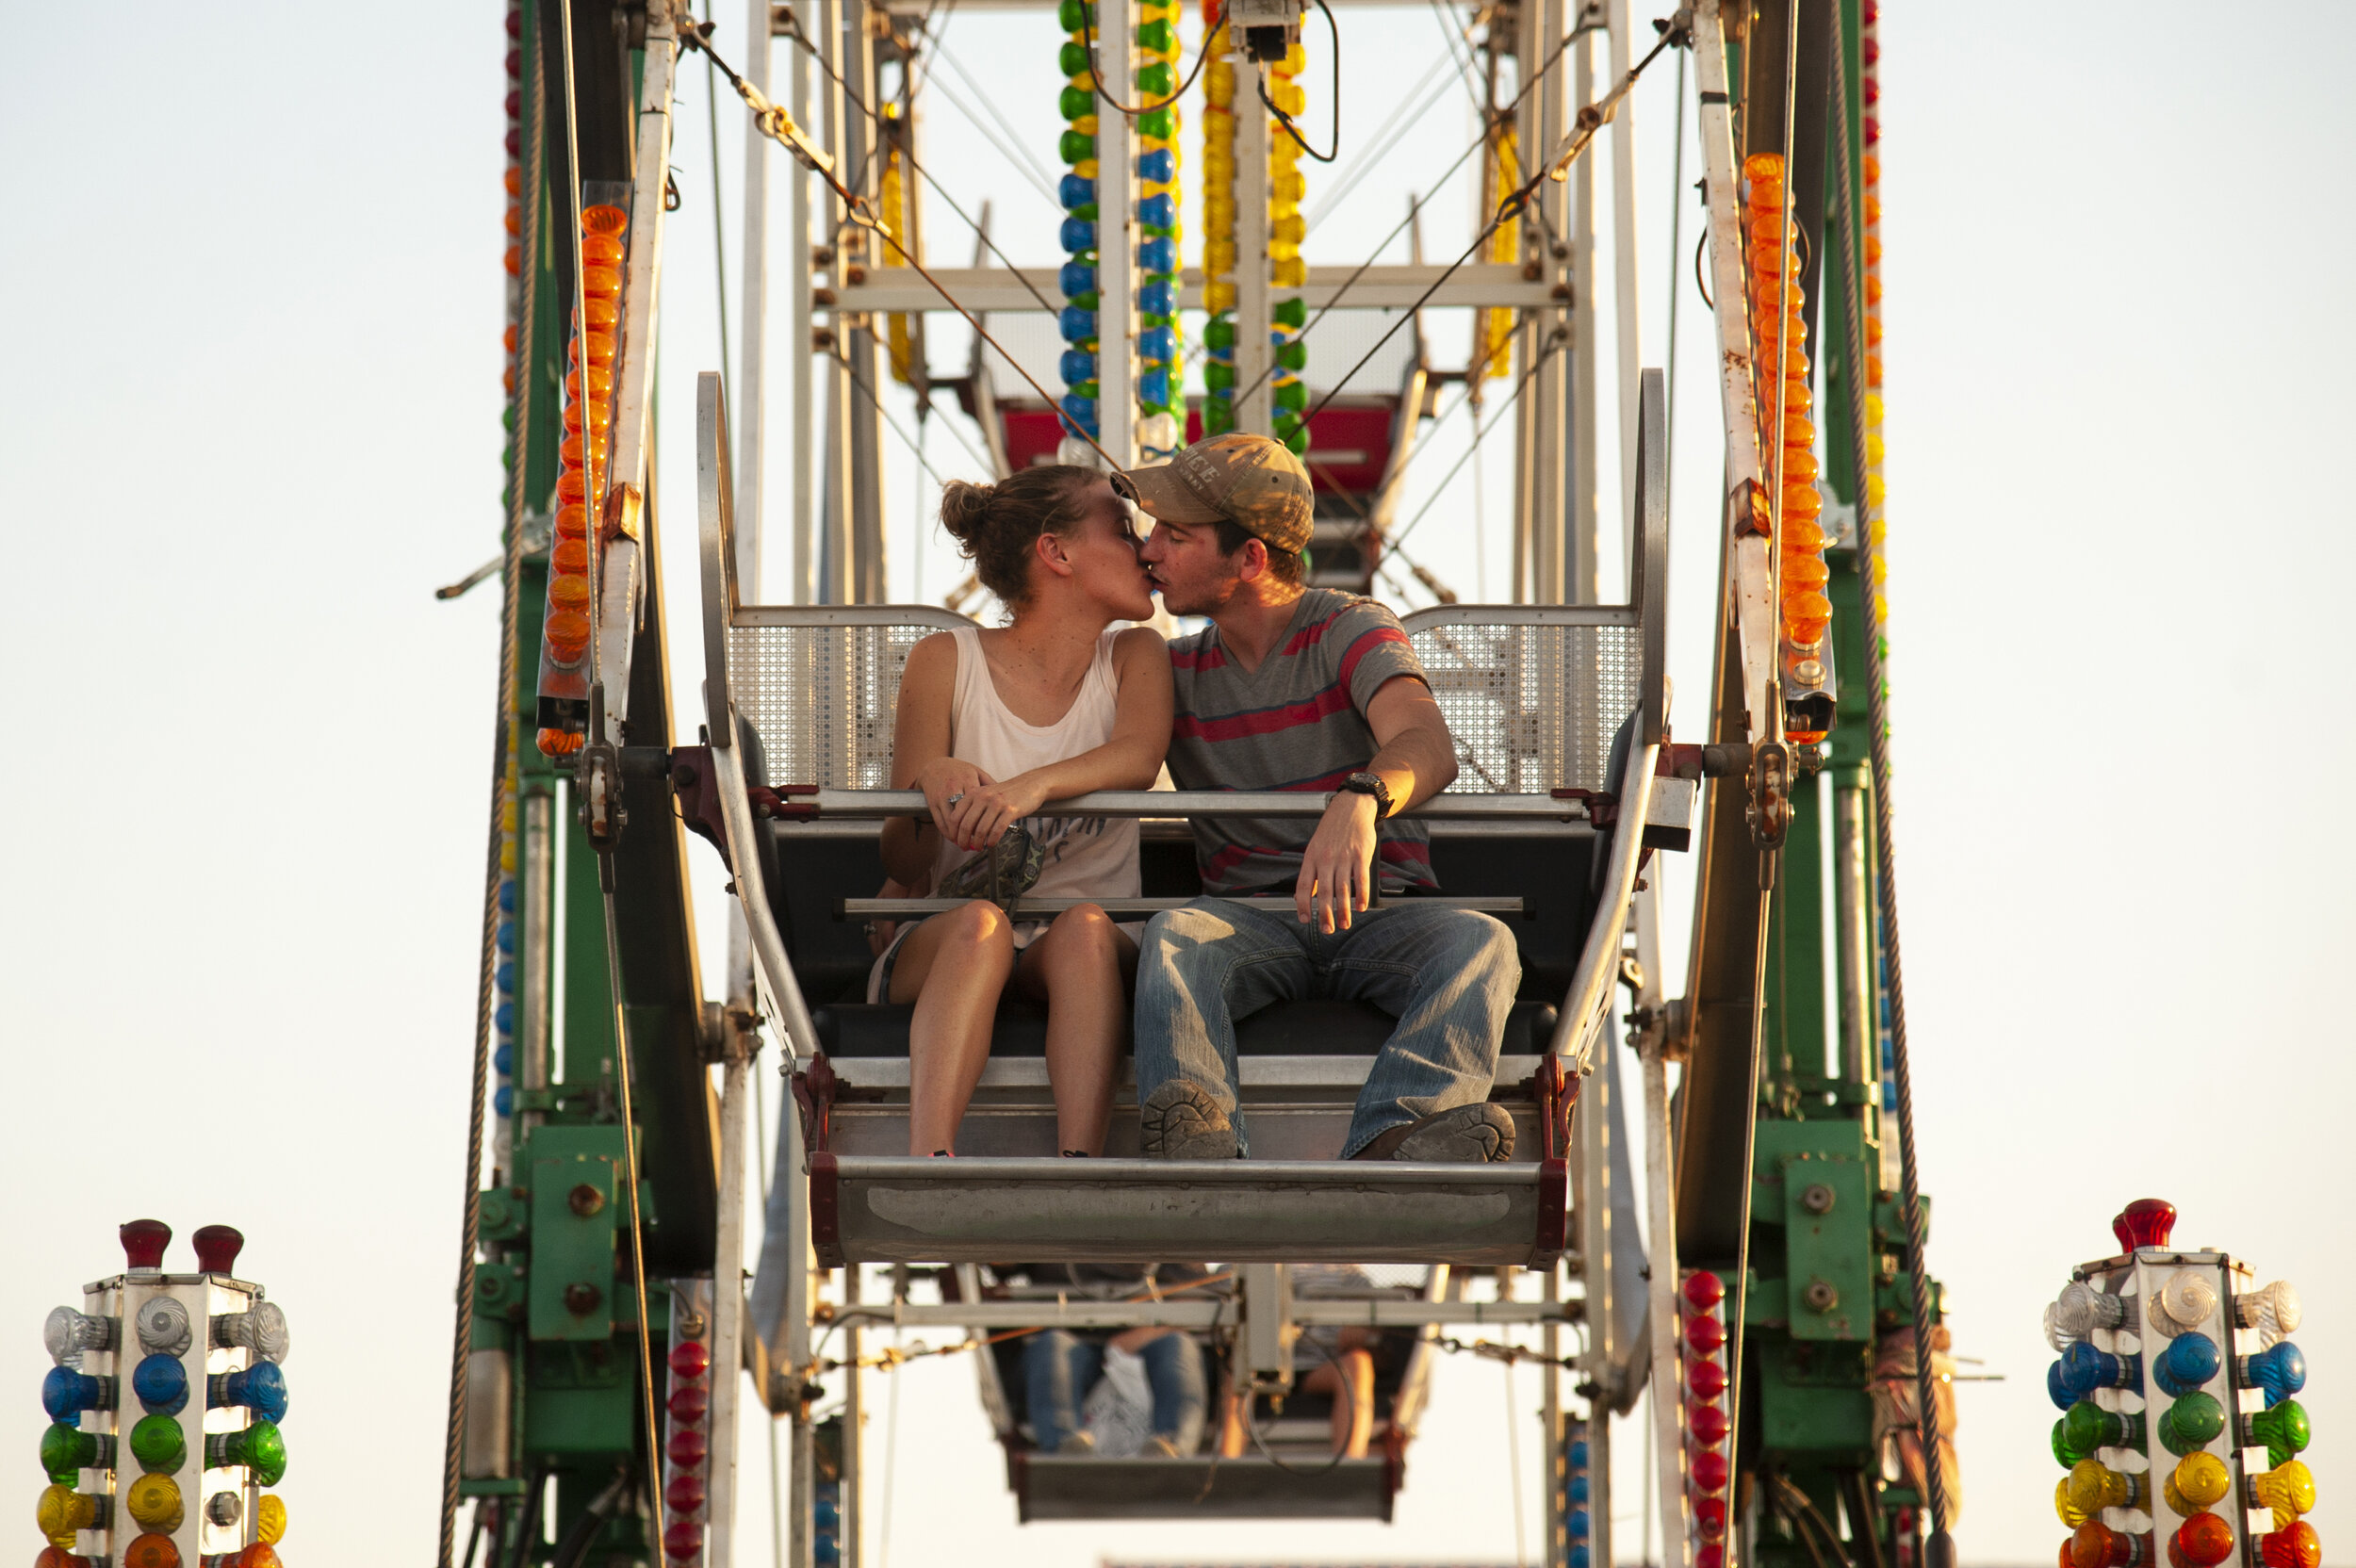  Kaitlyn Davenport and Jacob Grimes, both of Brookland, share a kiss while making the final decent on a carnival ride Sept. 19 at the Northeast Arkansas District Fair in Jonesboro, Arkansas. The pair said they have been dating for six months.  